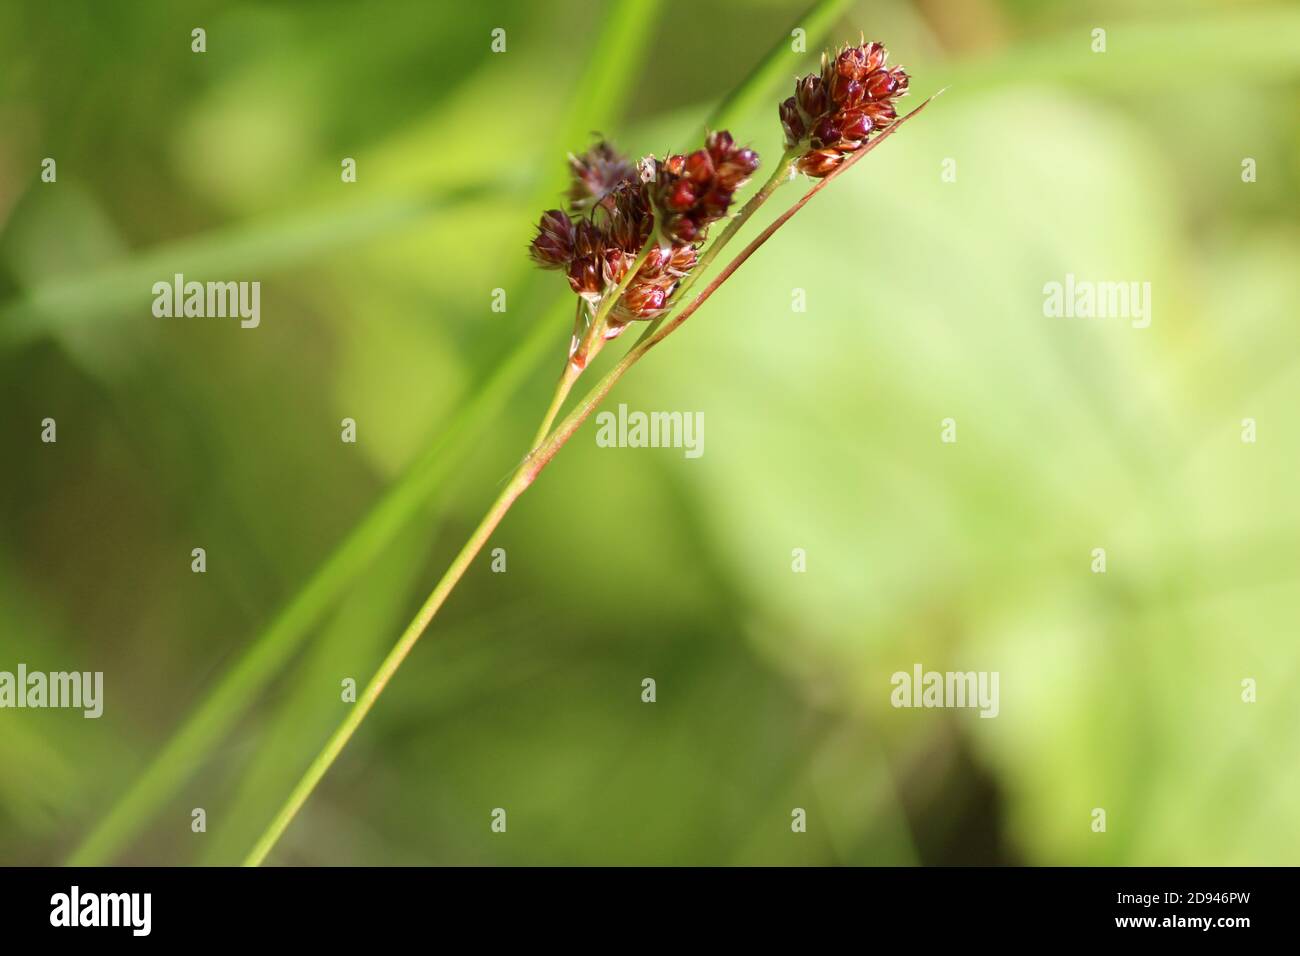 Luzula multiflora or common woodrush or heath wood-rush.  Ripe spikelet of grass with red seeds on a sunny summer day against the background of a gree Stock Photo